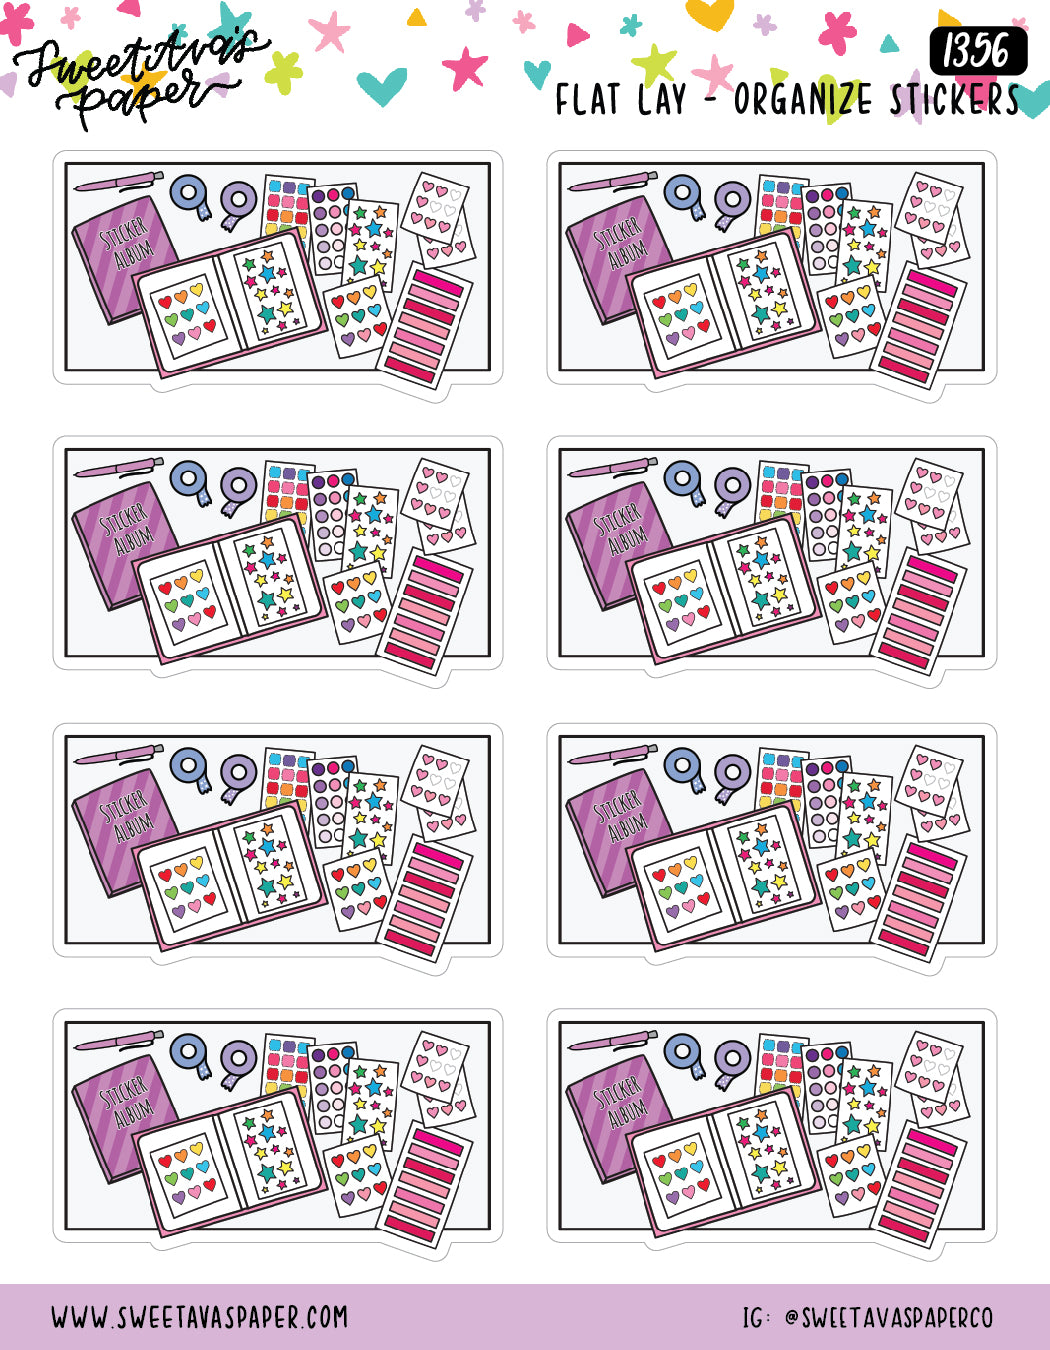 Organize Stickers Flat Lay Planner Stickers - [1356]